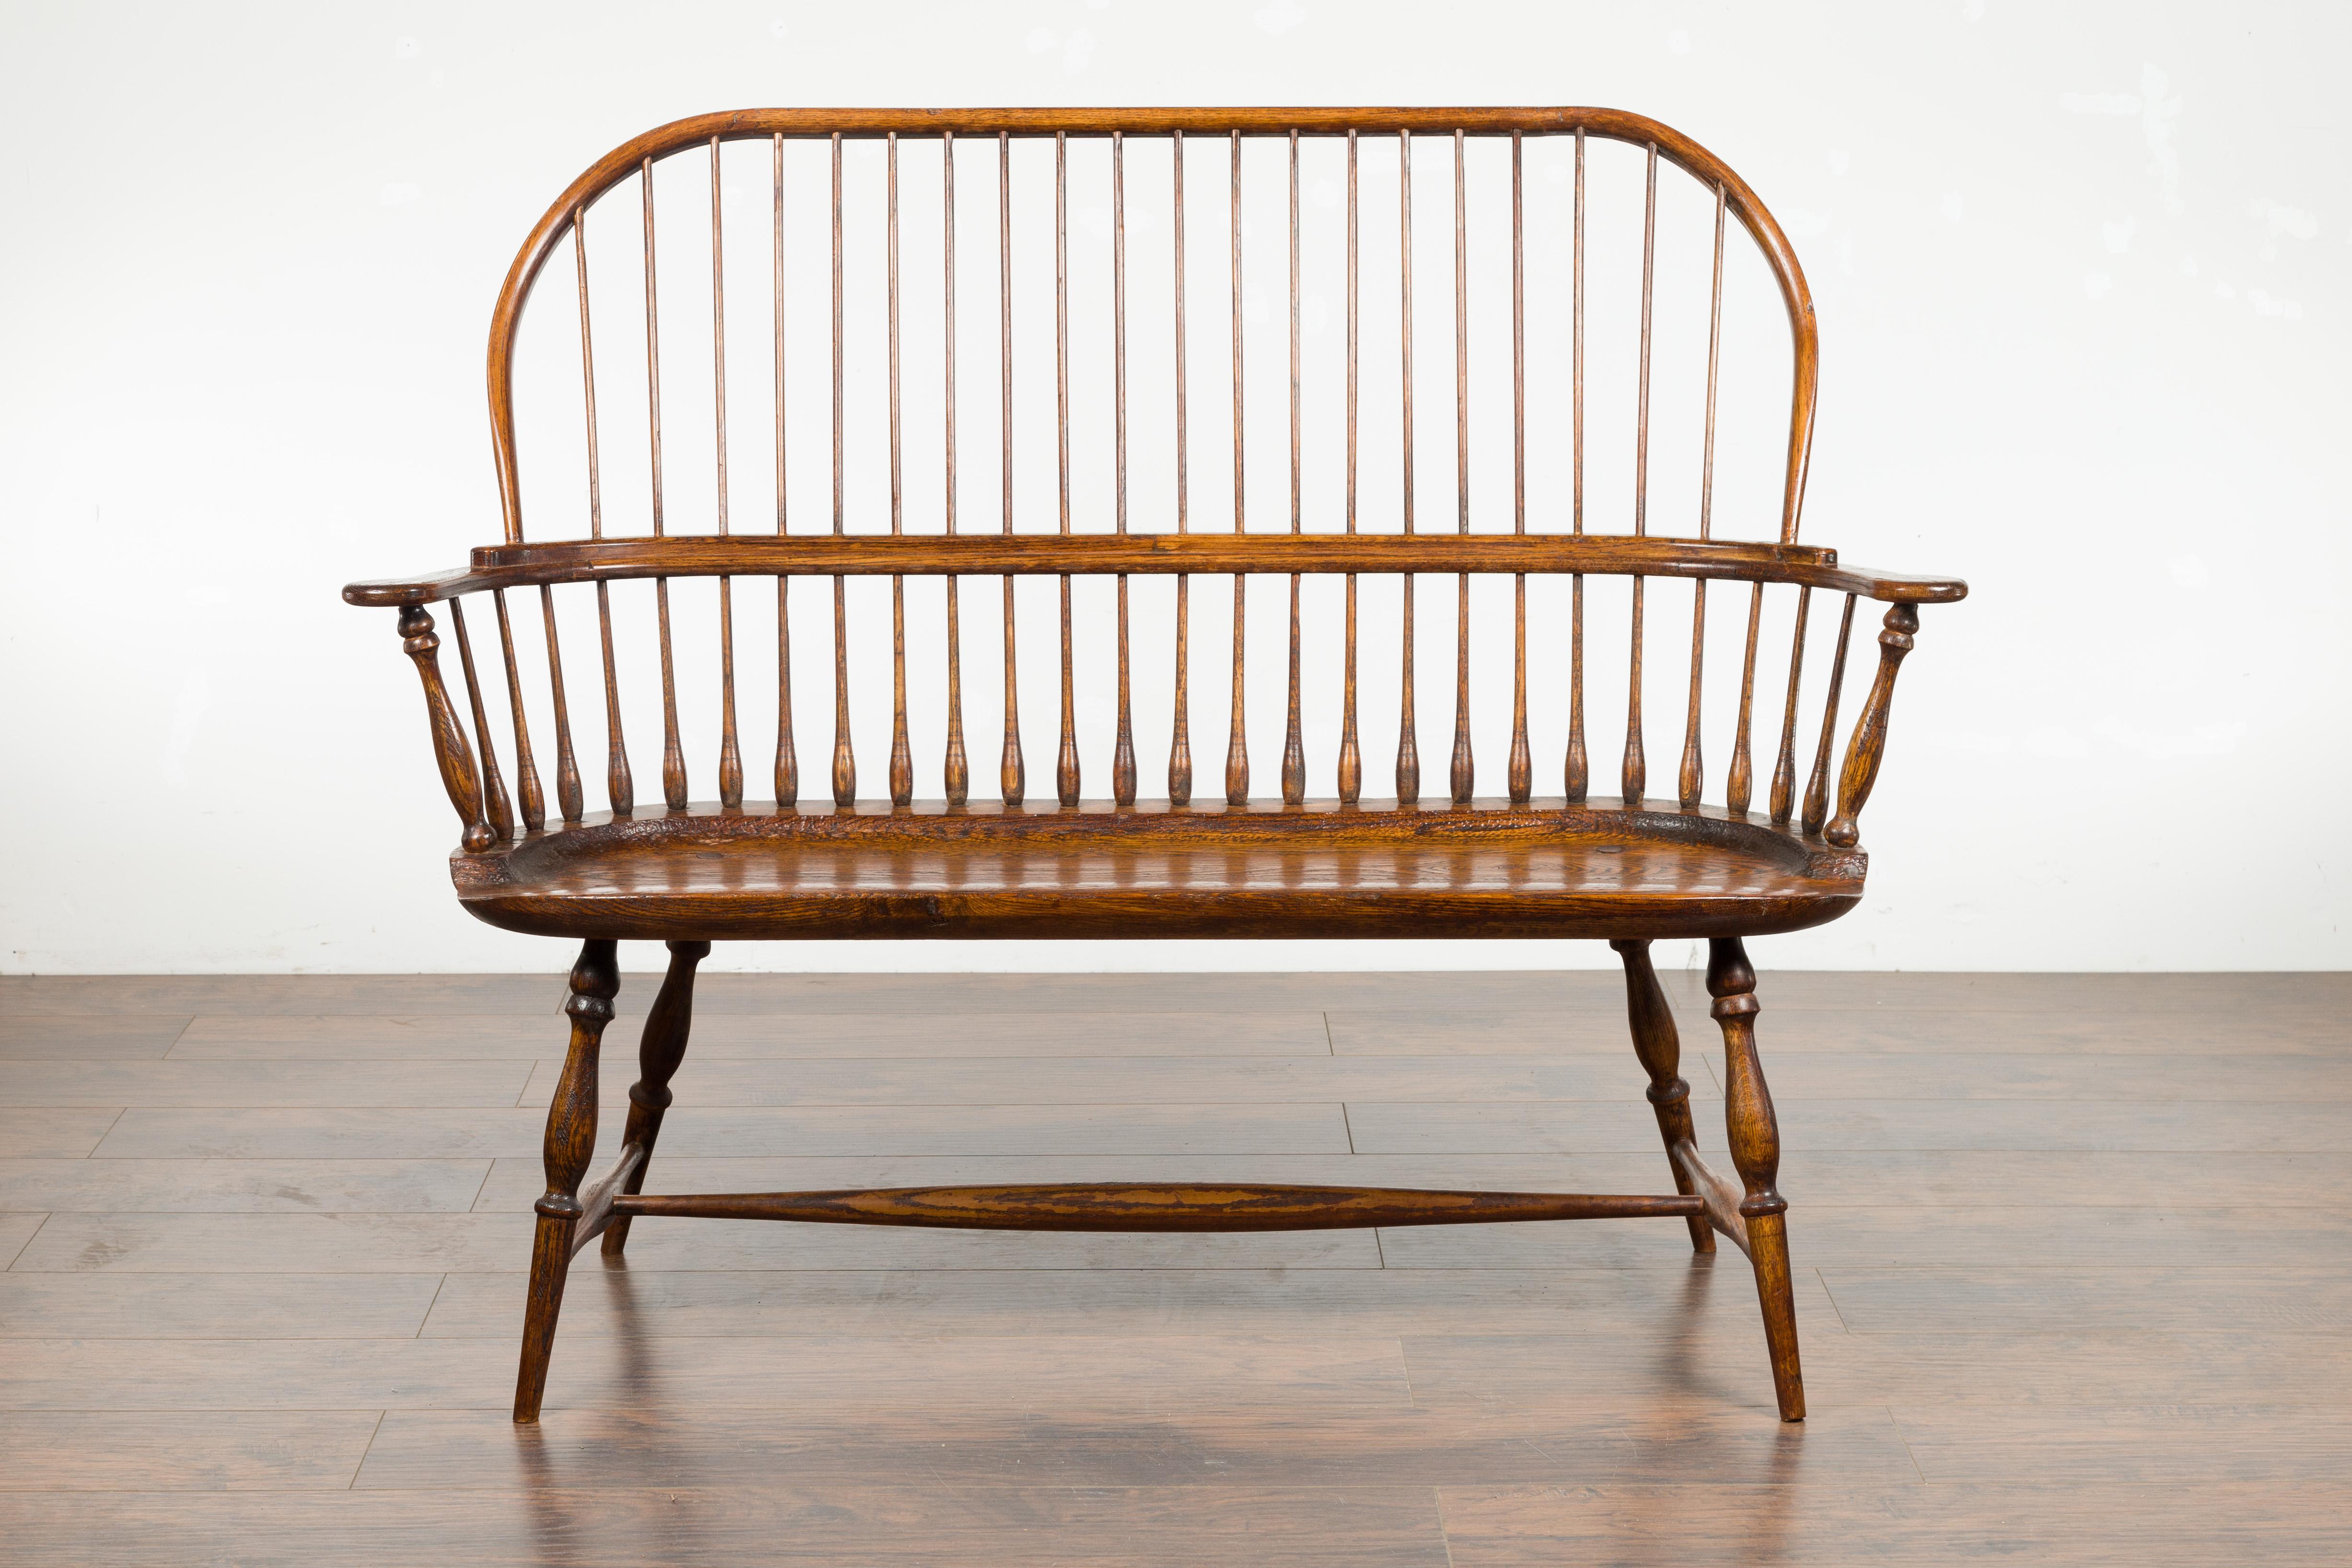 An English oak Windsor bench from the 19th century, with spindle accents and cross stretcher. Created in England during the 19th century, this Windsor bench features a slatted back with spindle motifs in the lower section, sitting on a wooden seat